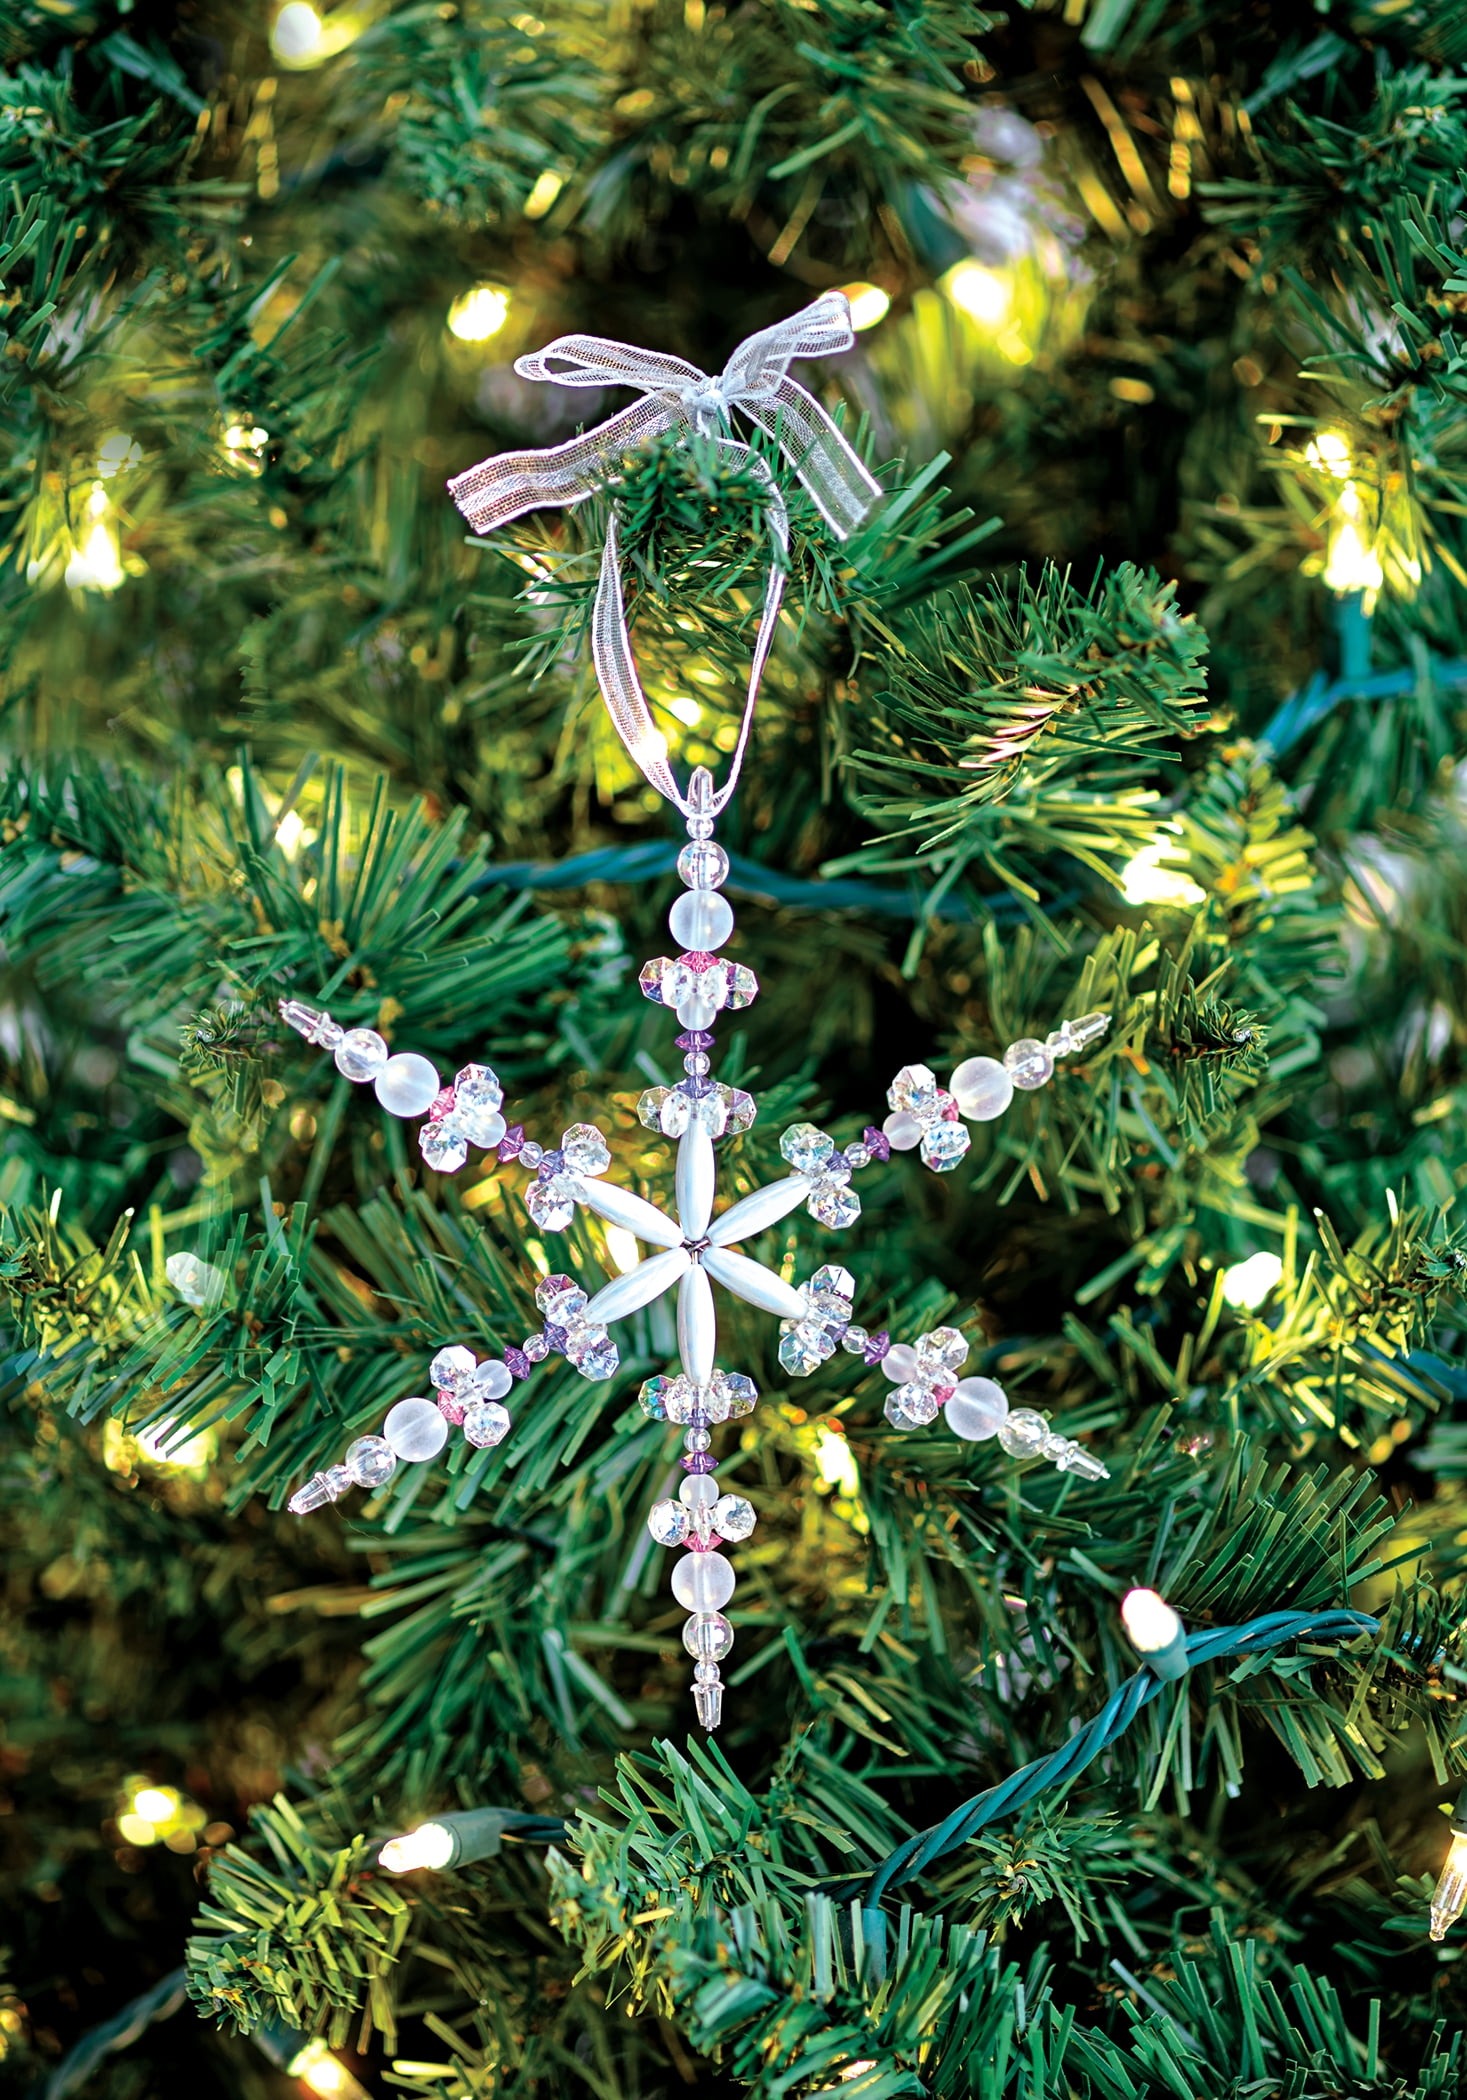 Snowflake Crafts - Easy Beaded Snowflakes - The Inspired Treehouse